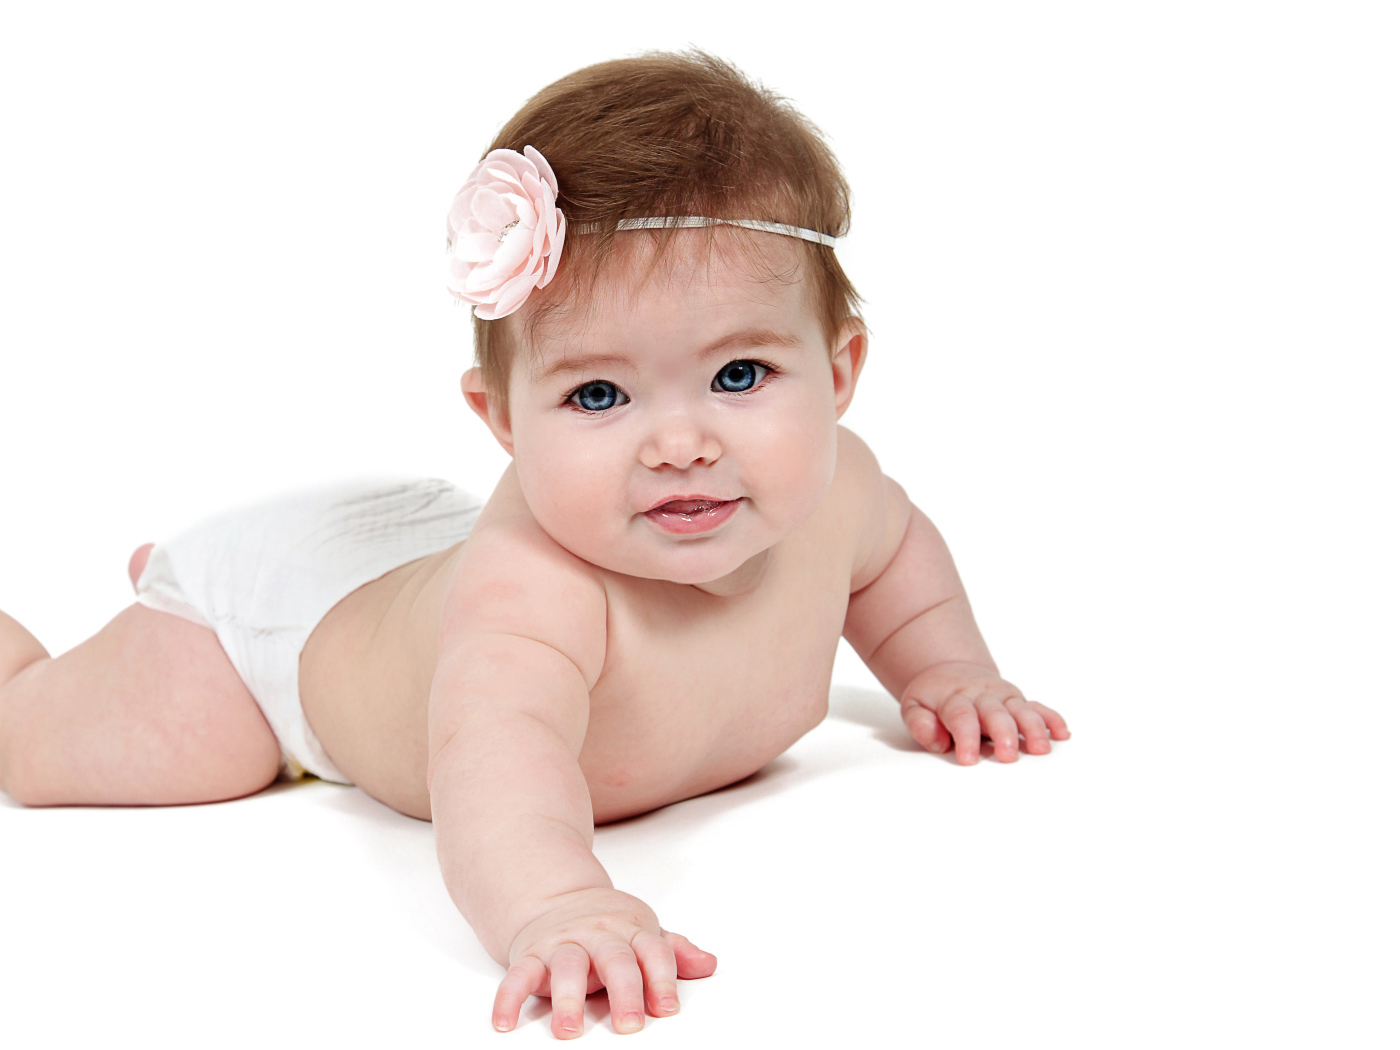 Smiling little blue-eyed baby on a white background